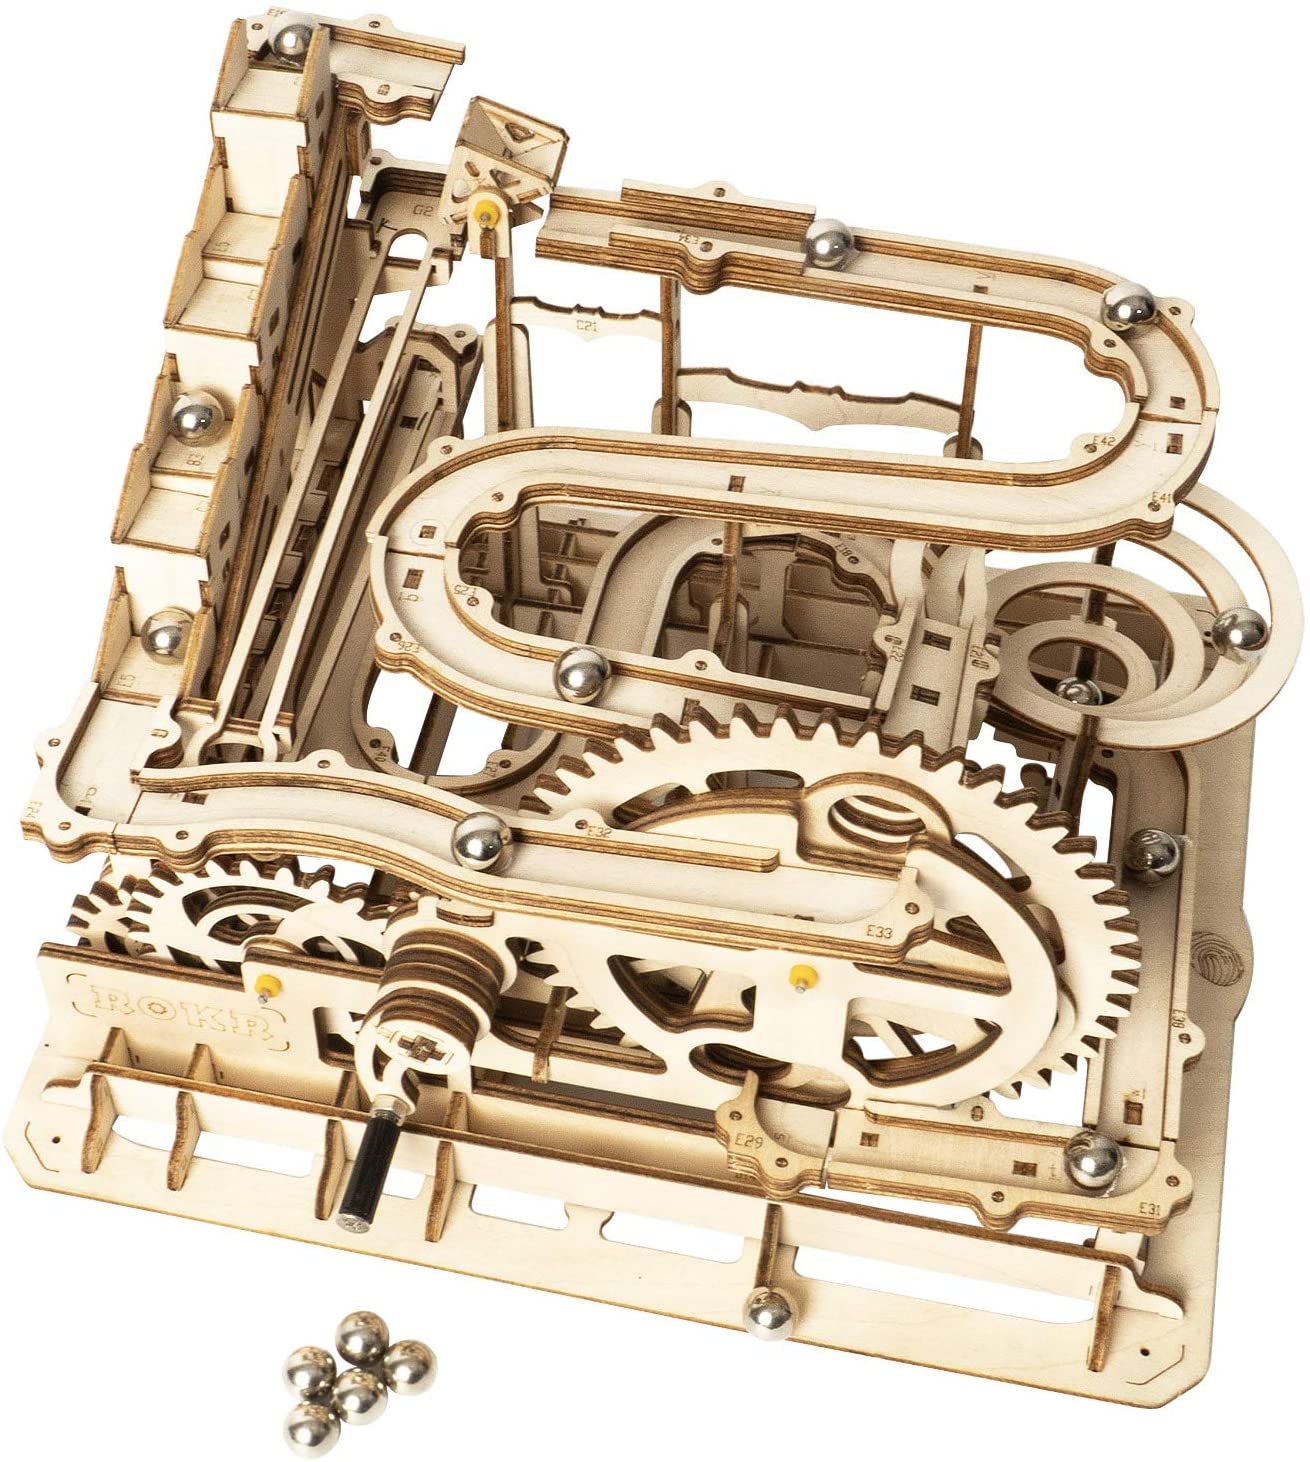 ROKR Marble Run Wooden Model Kits 3D Puzzle Mechanical Puzzles for Teens and 